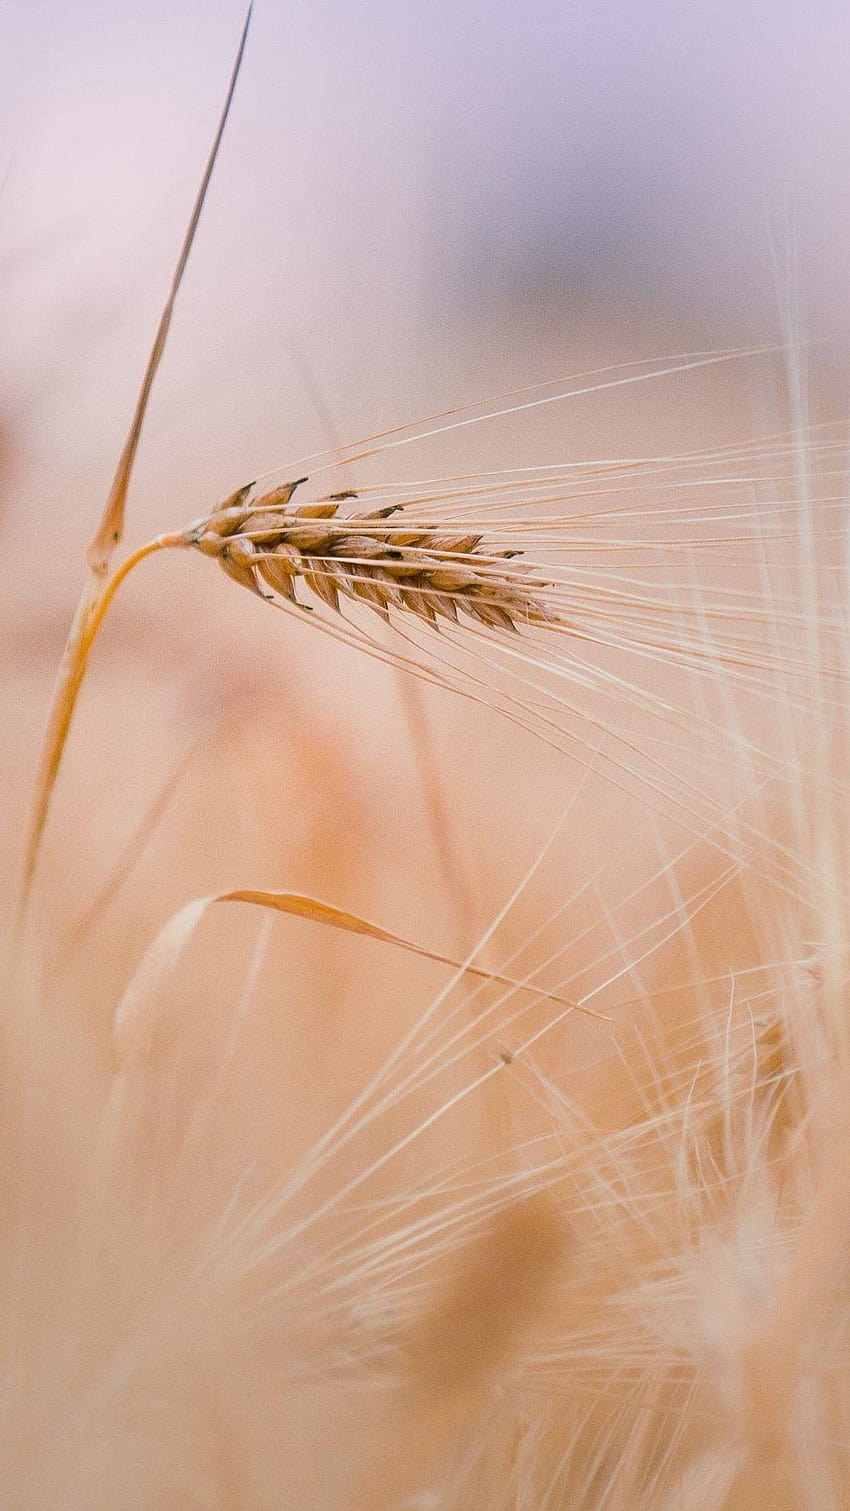 ↑↑TAP AND GET THE APP! Nature Wheat in Field Yellow Rye Ear, flowers wheat field HD phone wallpaper